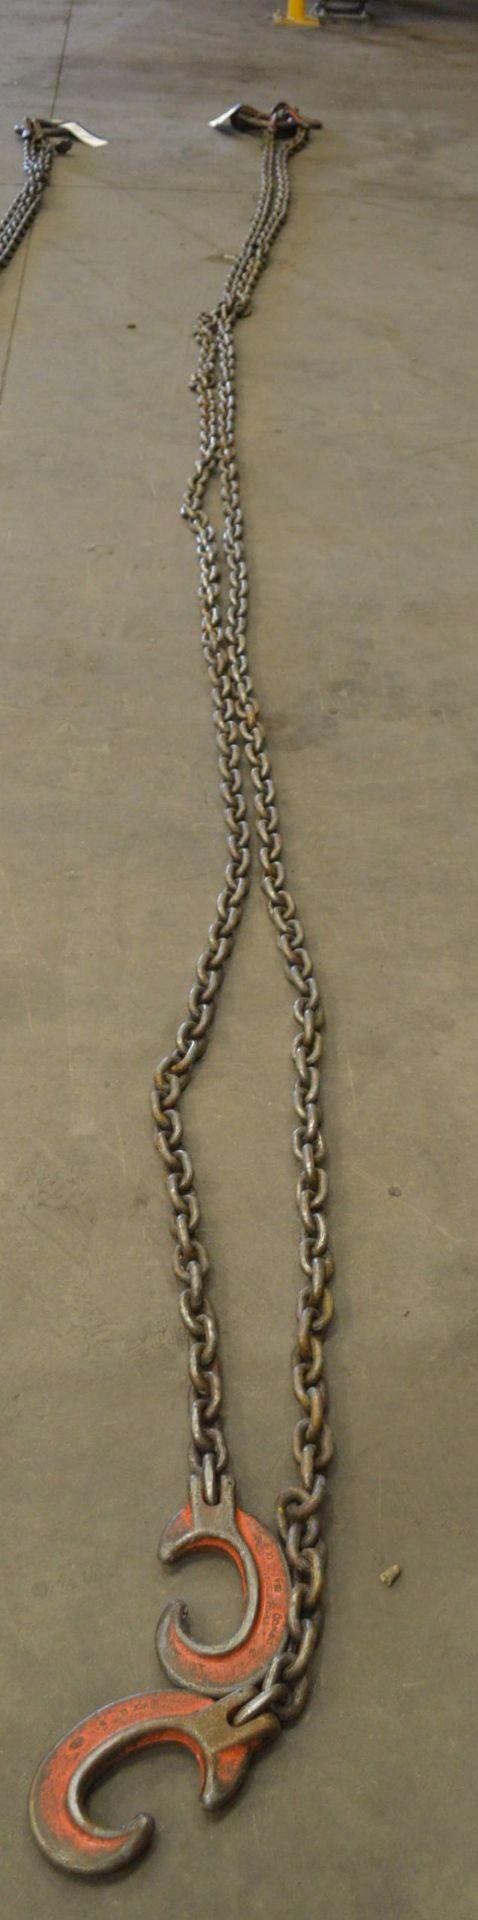 Pewag Two Leg Chain Sling, approx. 6.4m long, with tensioners